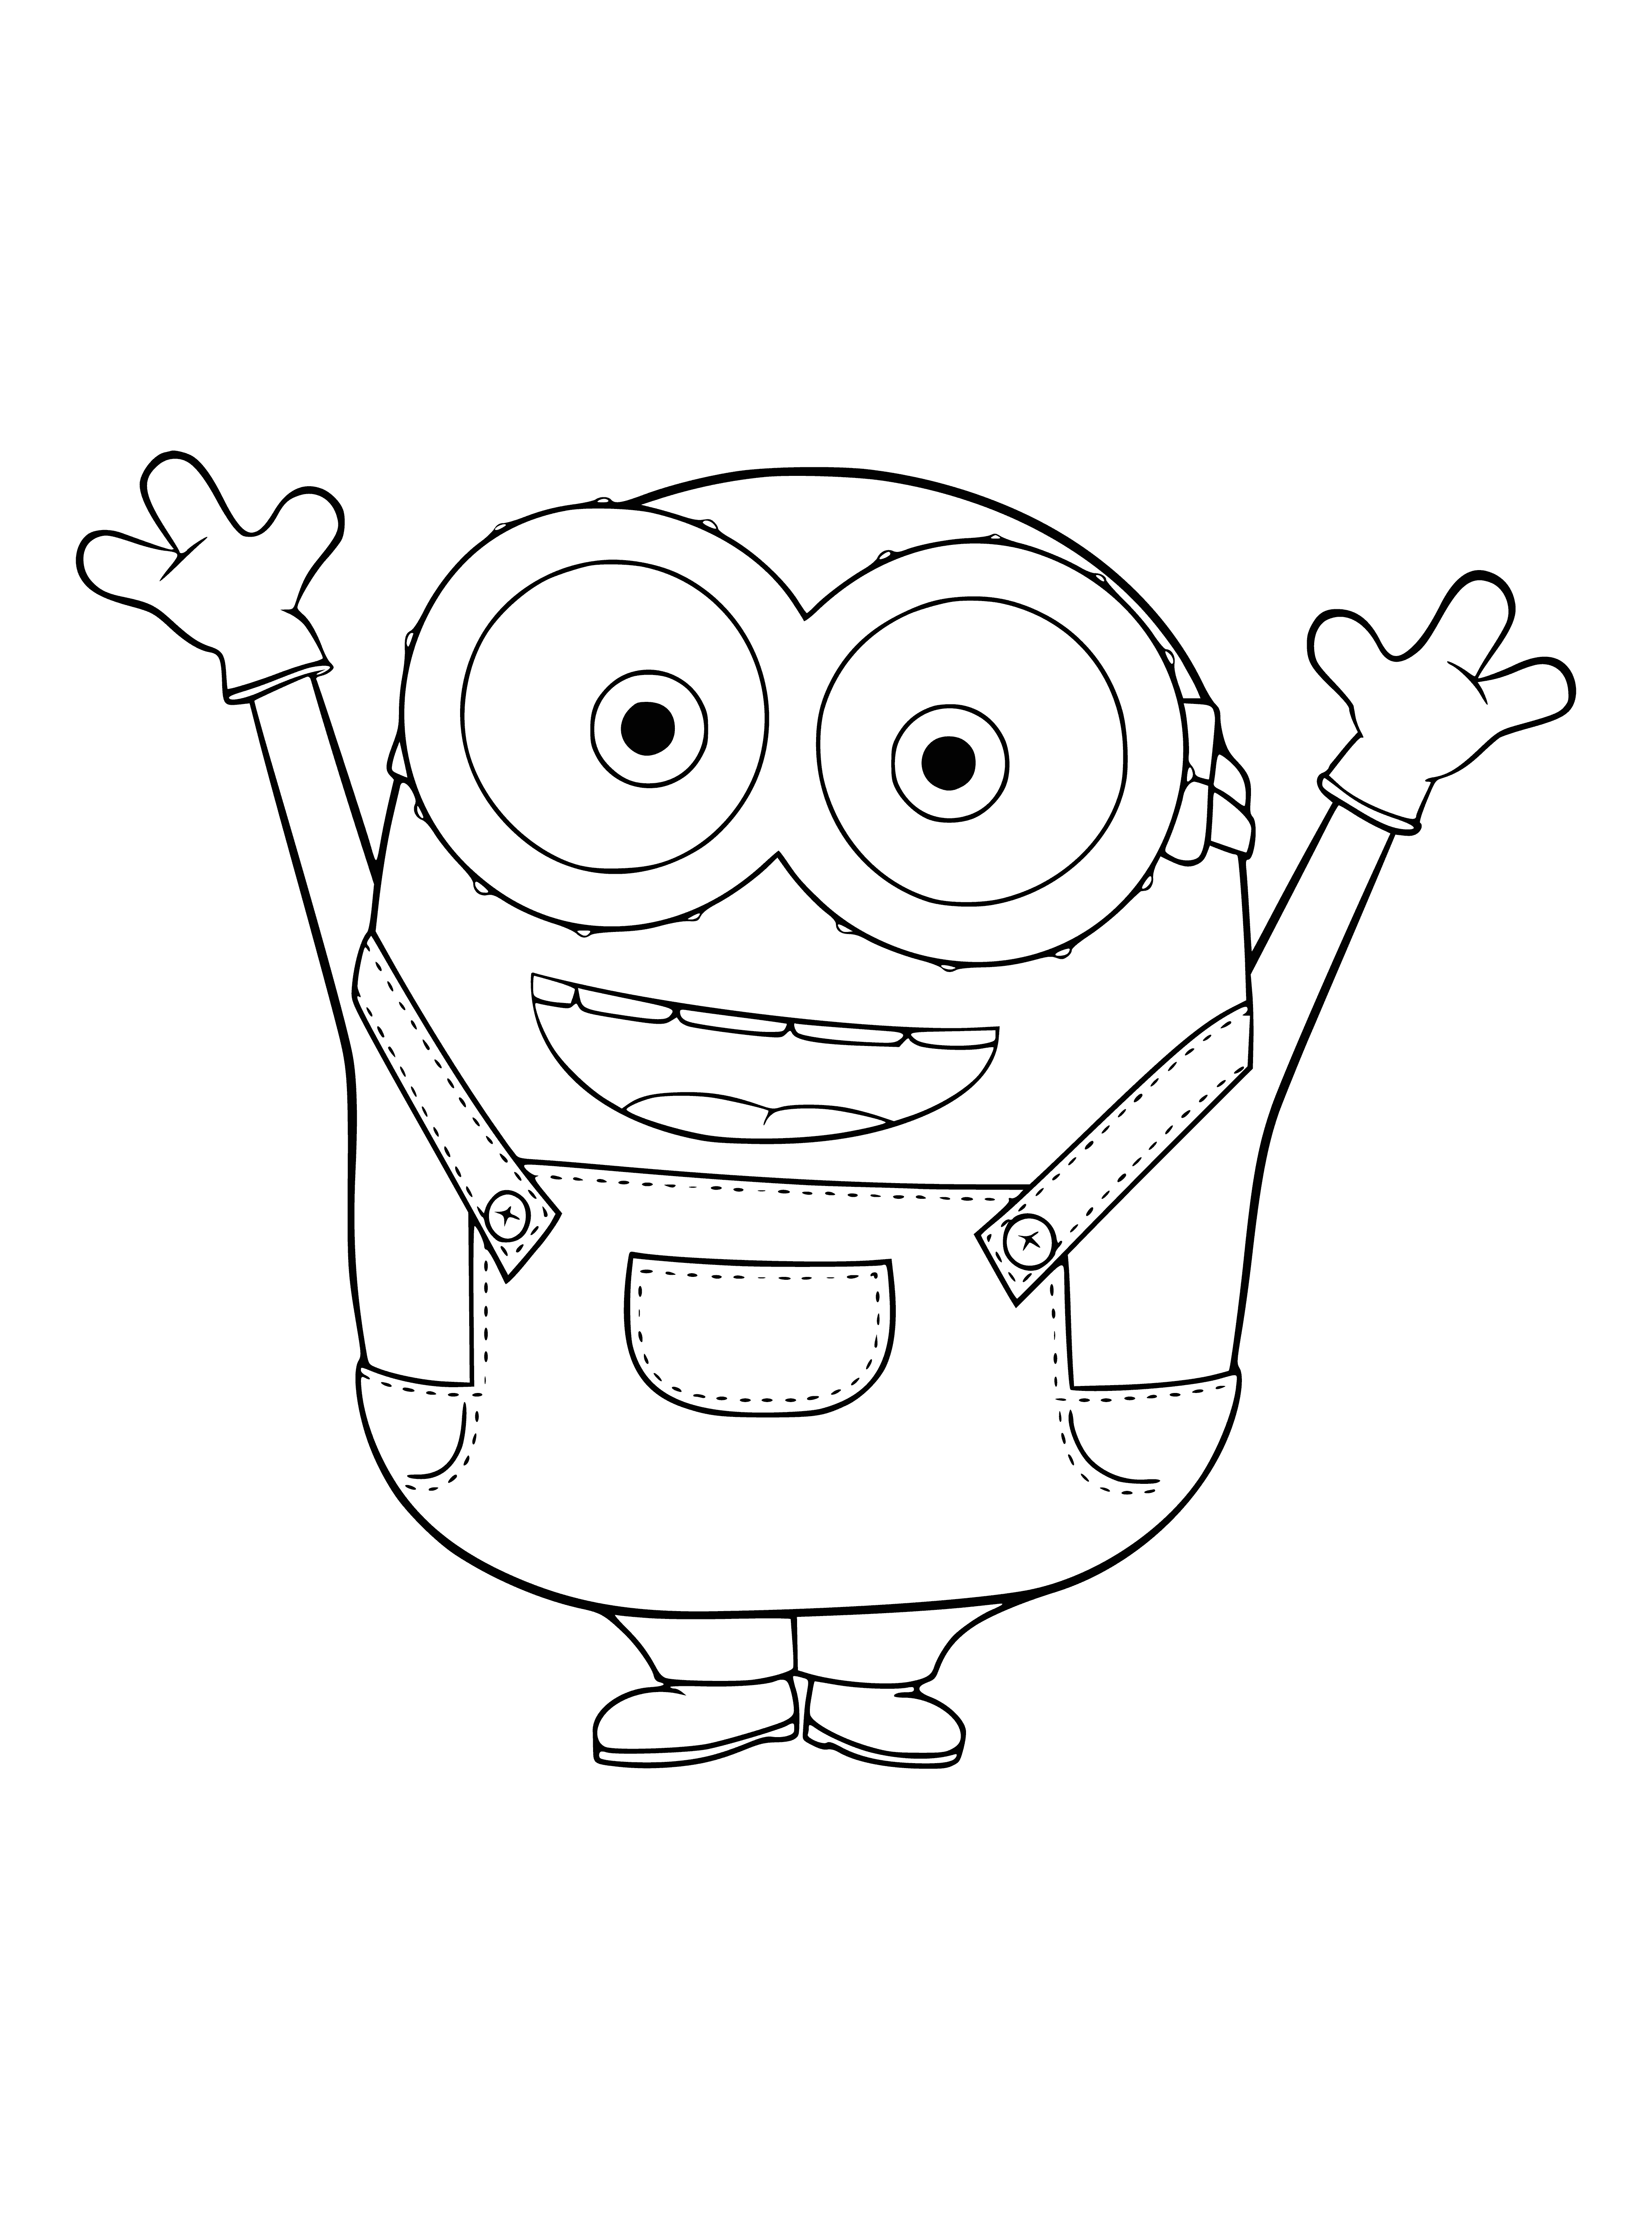 coloring page: Minion with light brown skin, two eyes, wide mouth, blue overall, brown hat with red band, standing on yellow platform.